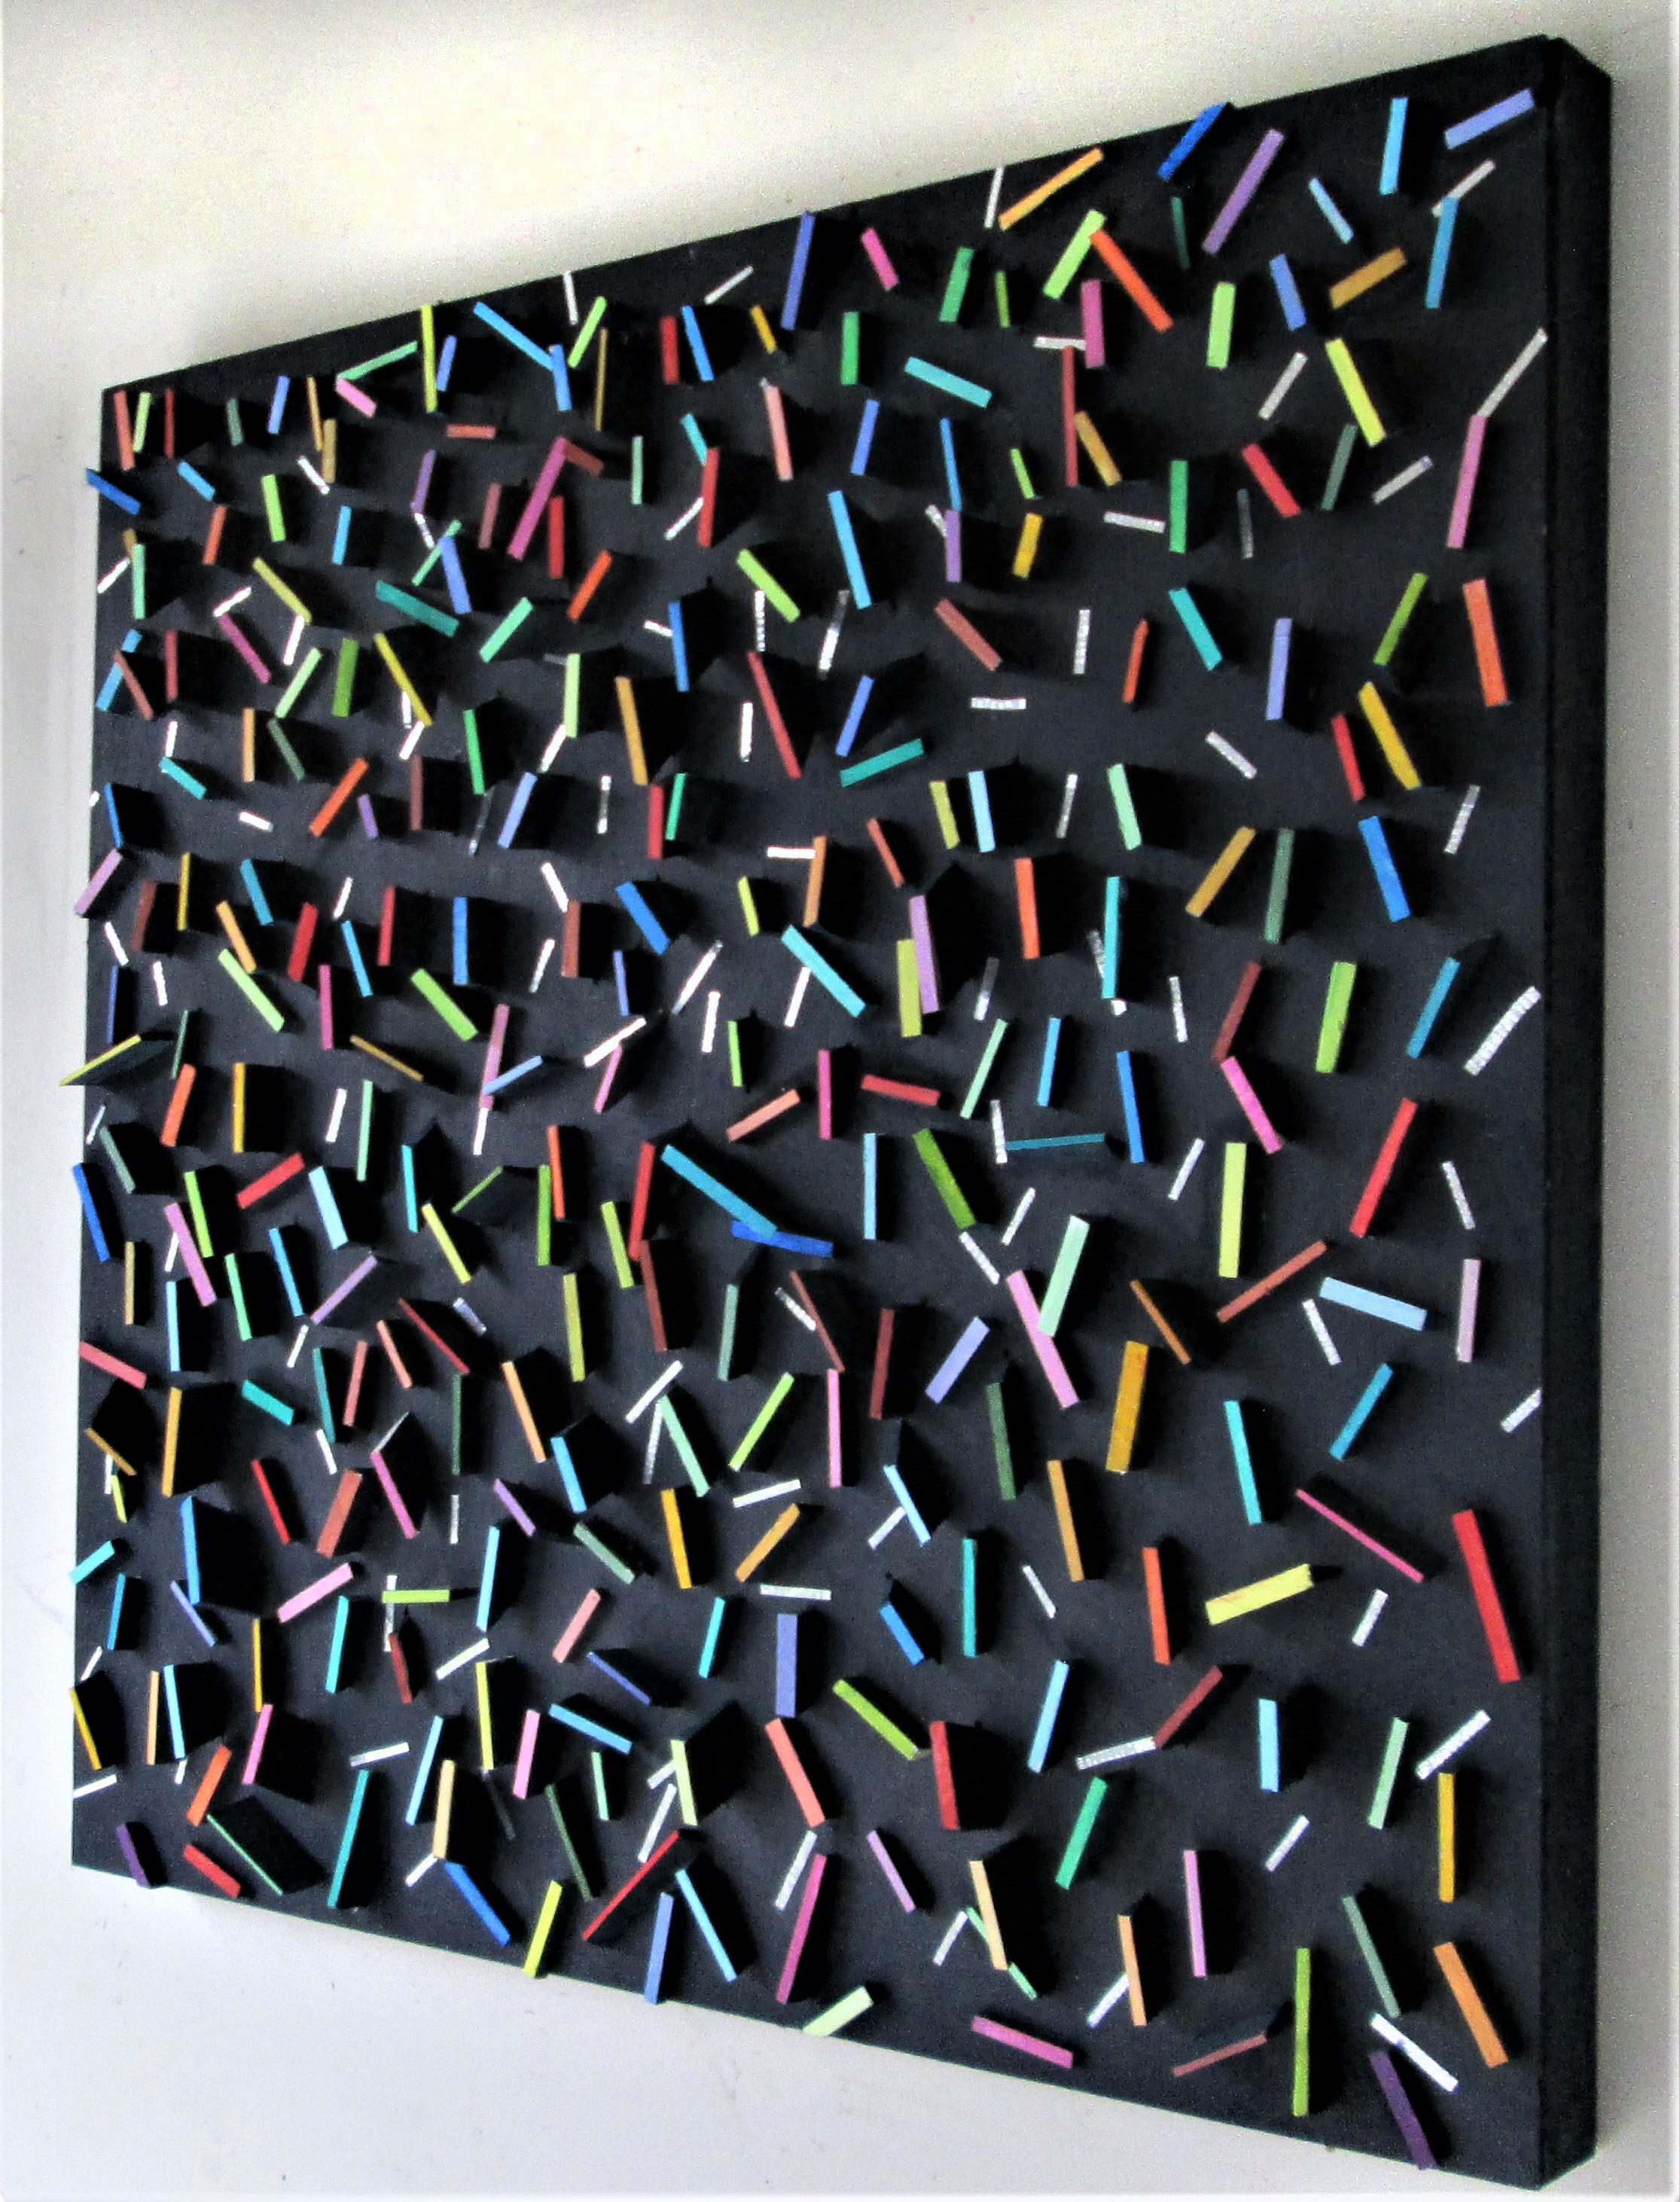 Hip, Hip, Hooray! (Memphis Style Multicolored 3D Wooden Wall Sculpture, Square) 